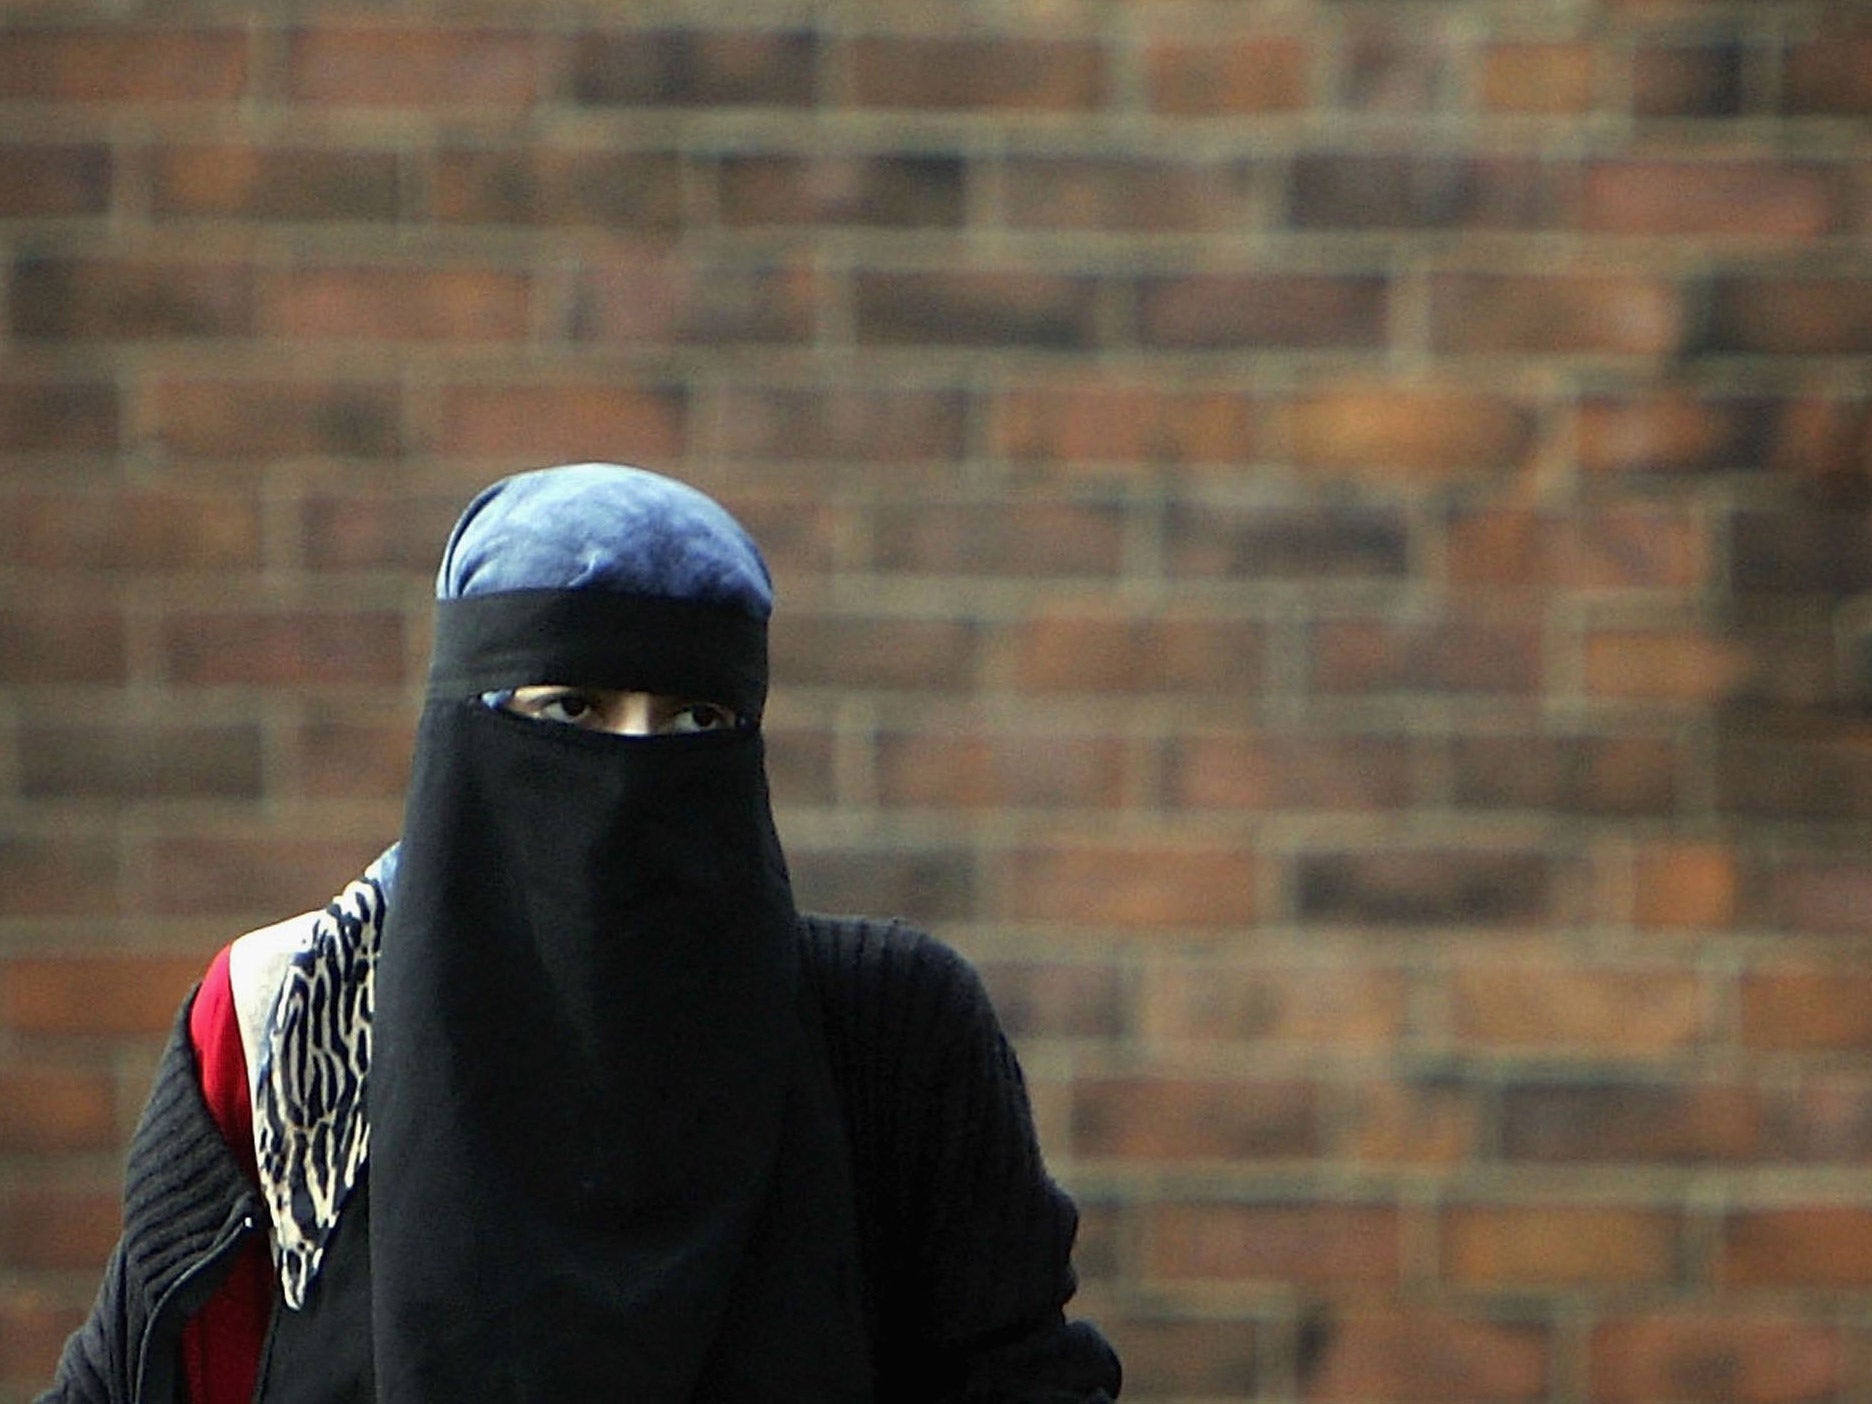 Women are said to make up the majority of victims of Islamophobic attacks